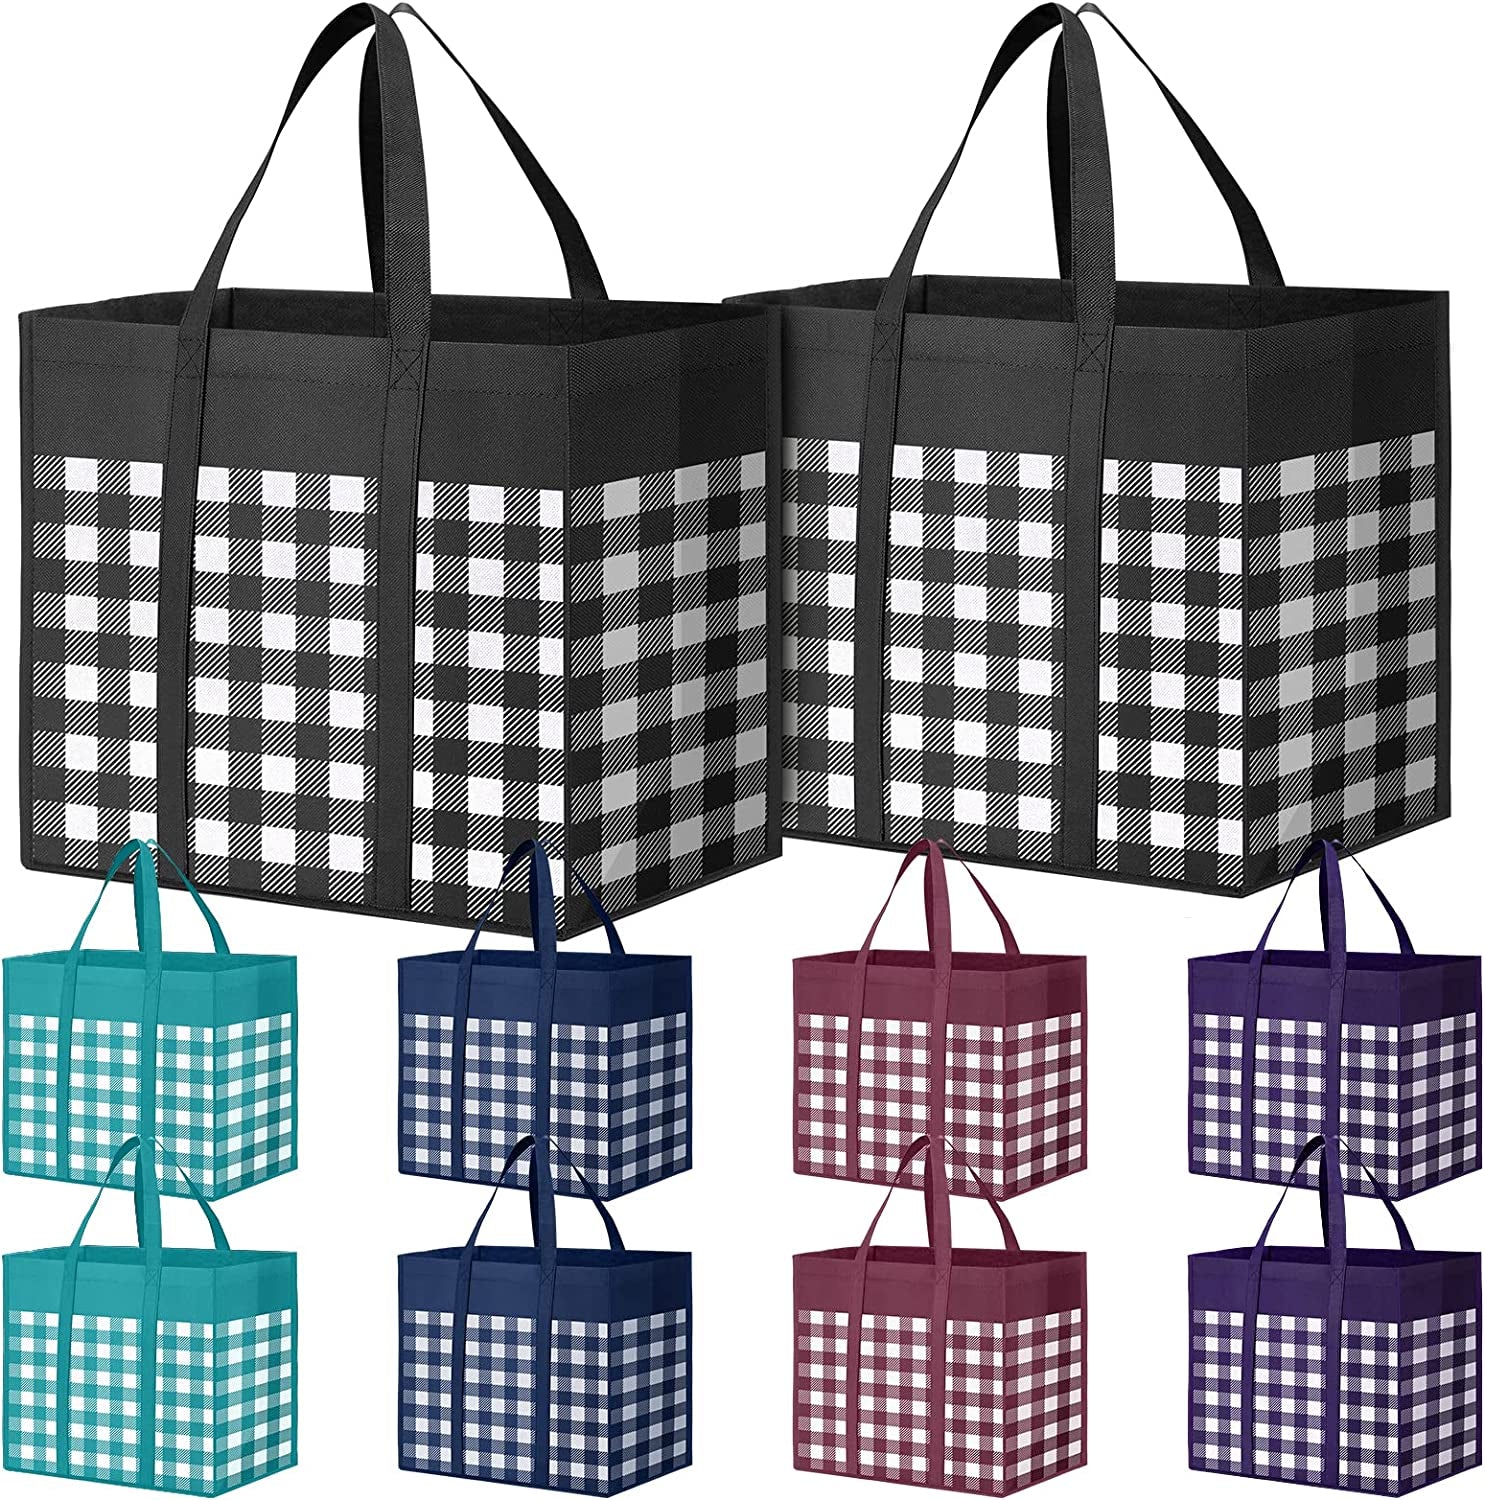 10-Pack Large Reusable Grocery Bags - Everyday-Sales.com